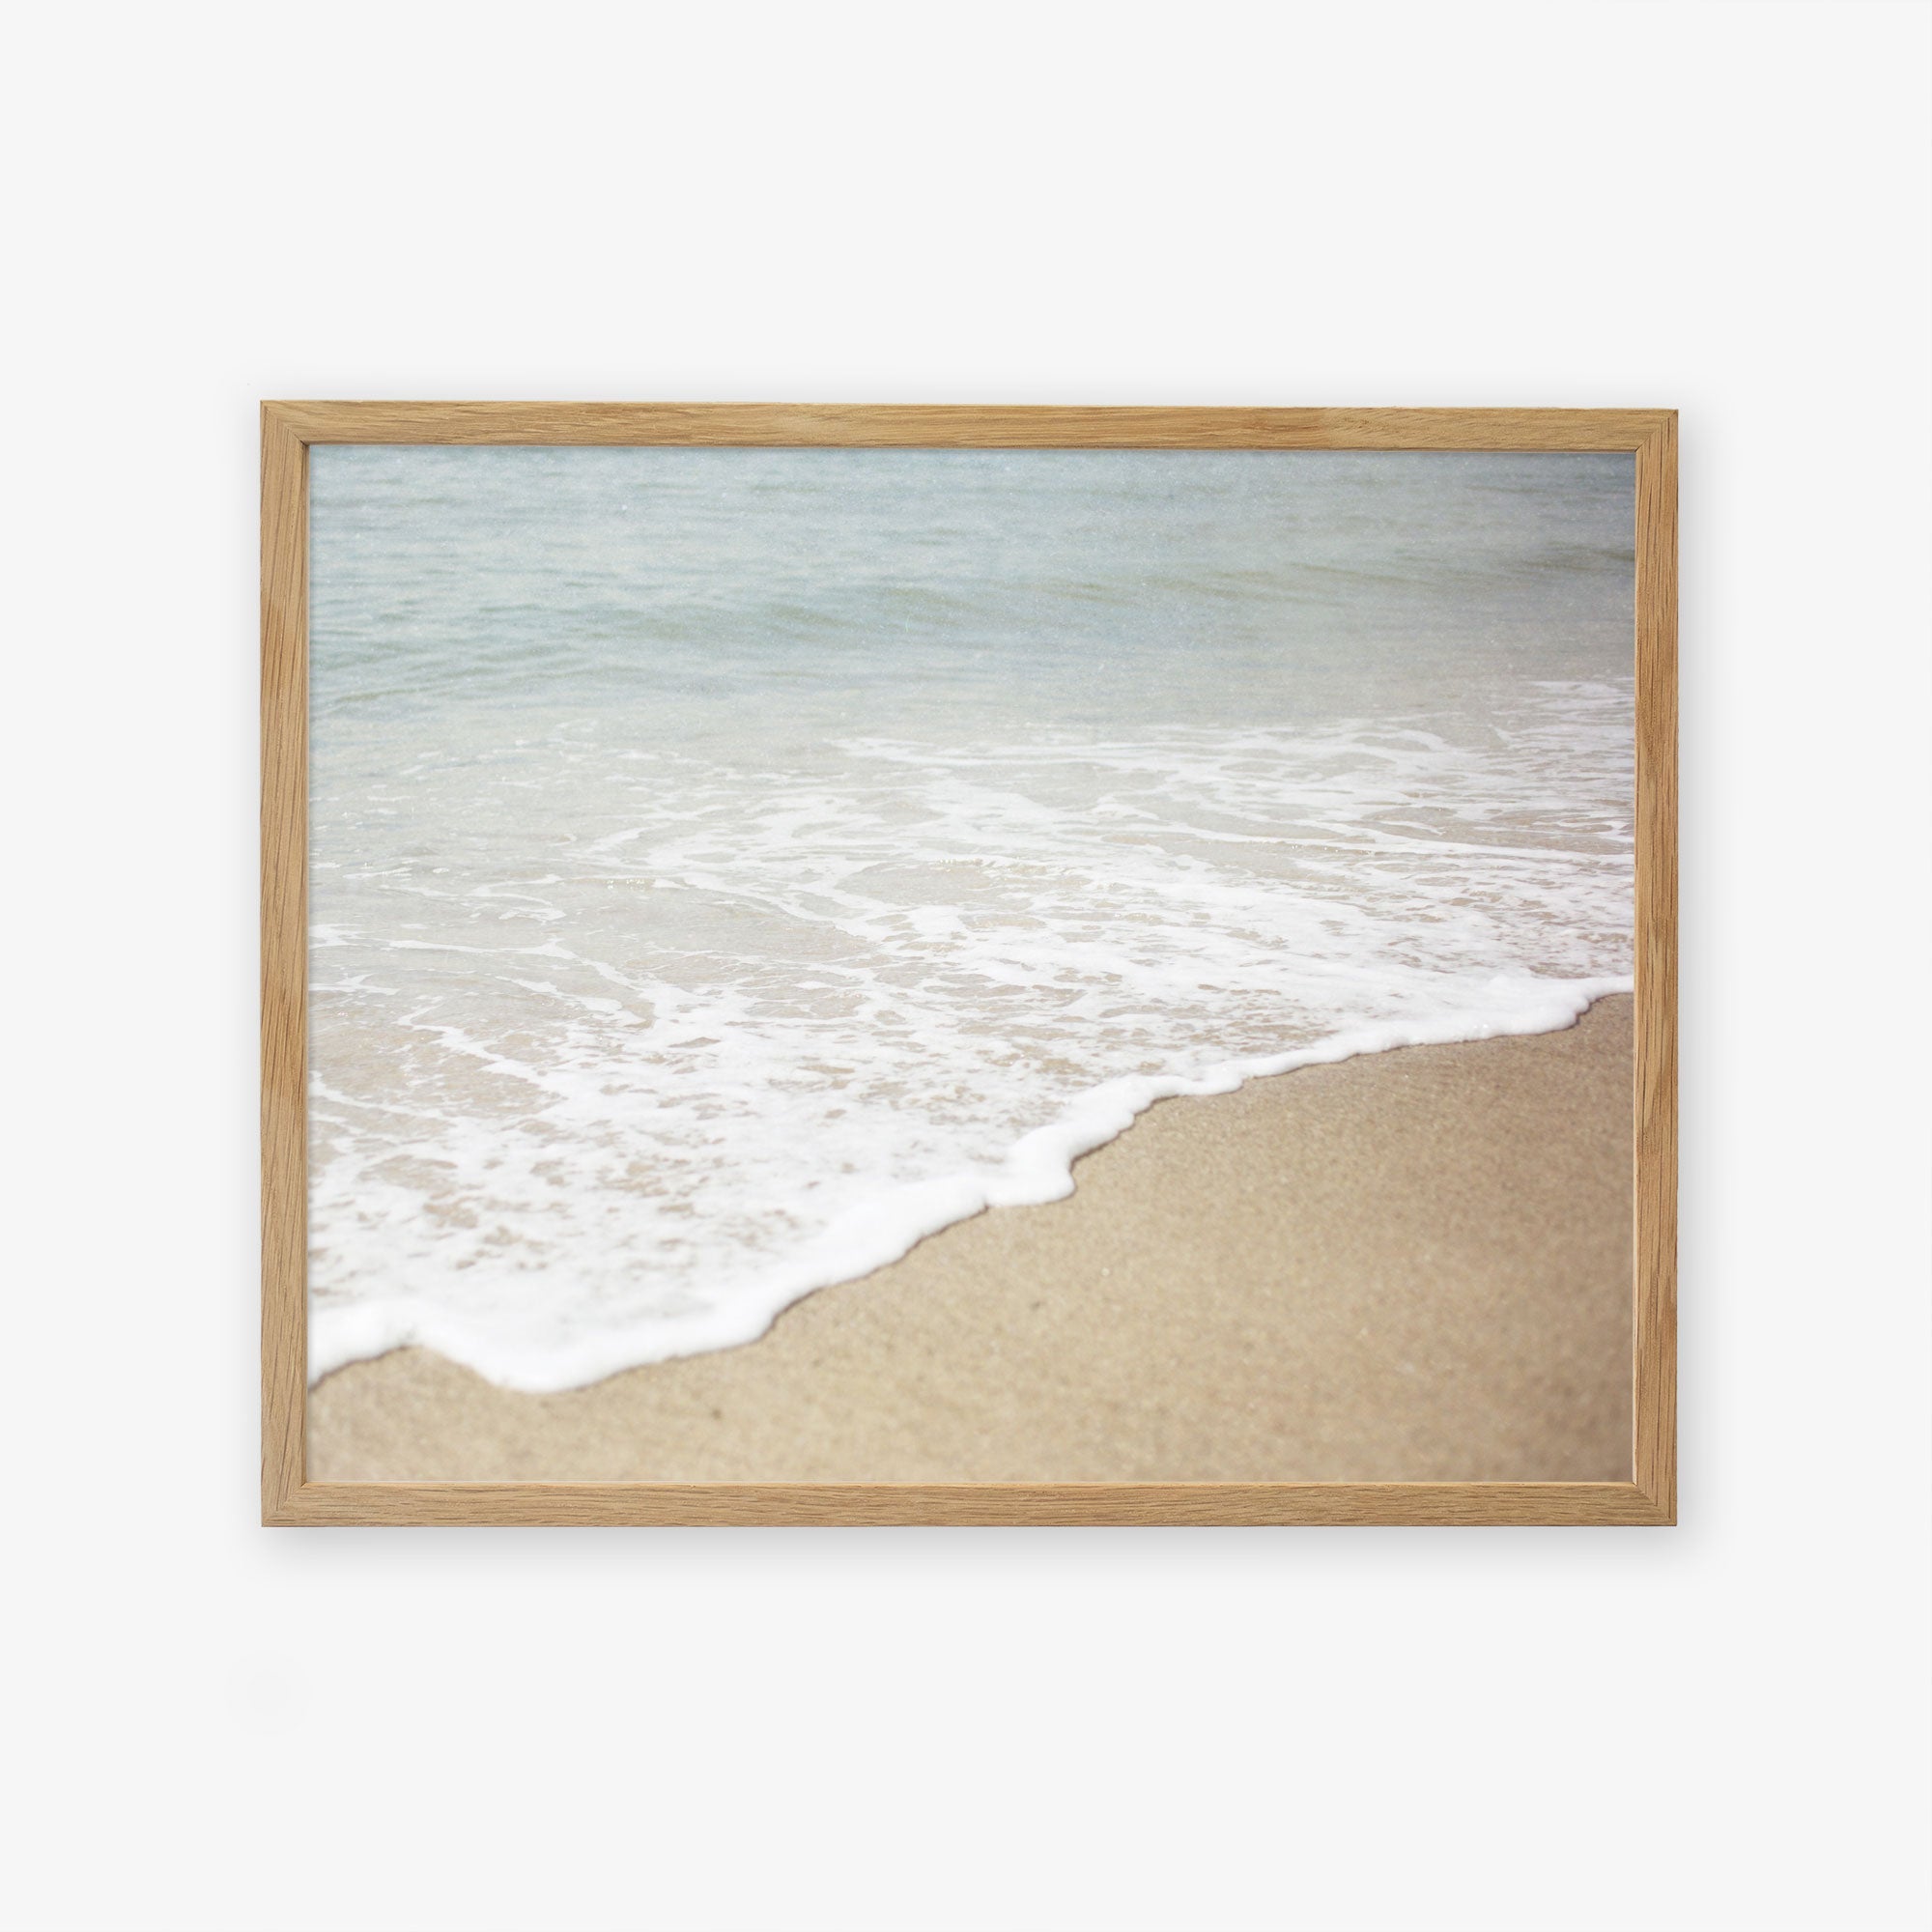 A framed photograph of Offley Green&#39;s &#39;Chasing Surf&#39; Beach Waves Print, capturing the gentle waves meeting the sandy shore in a serene California beach scene, displayed on a plain white background.